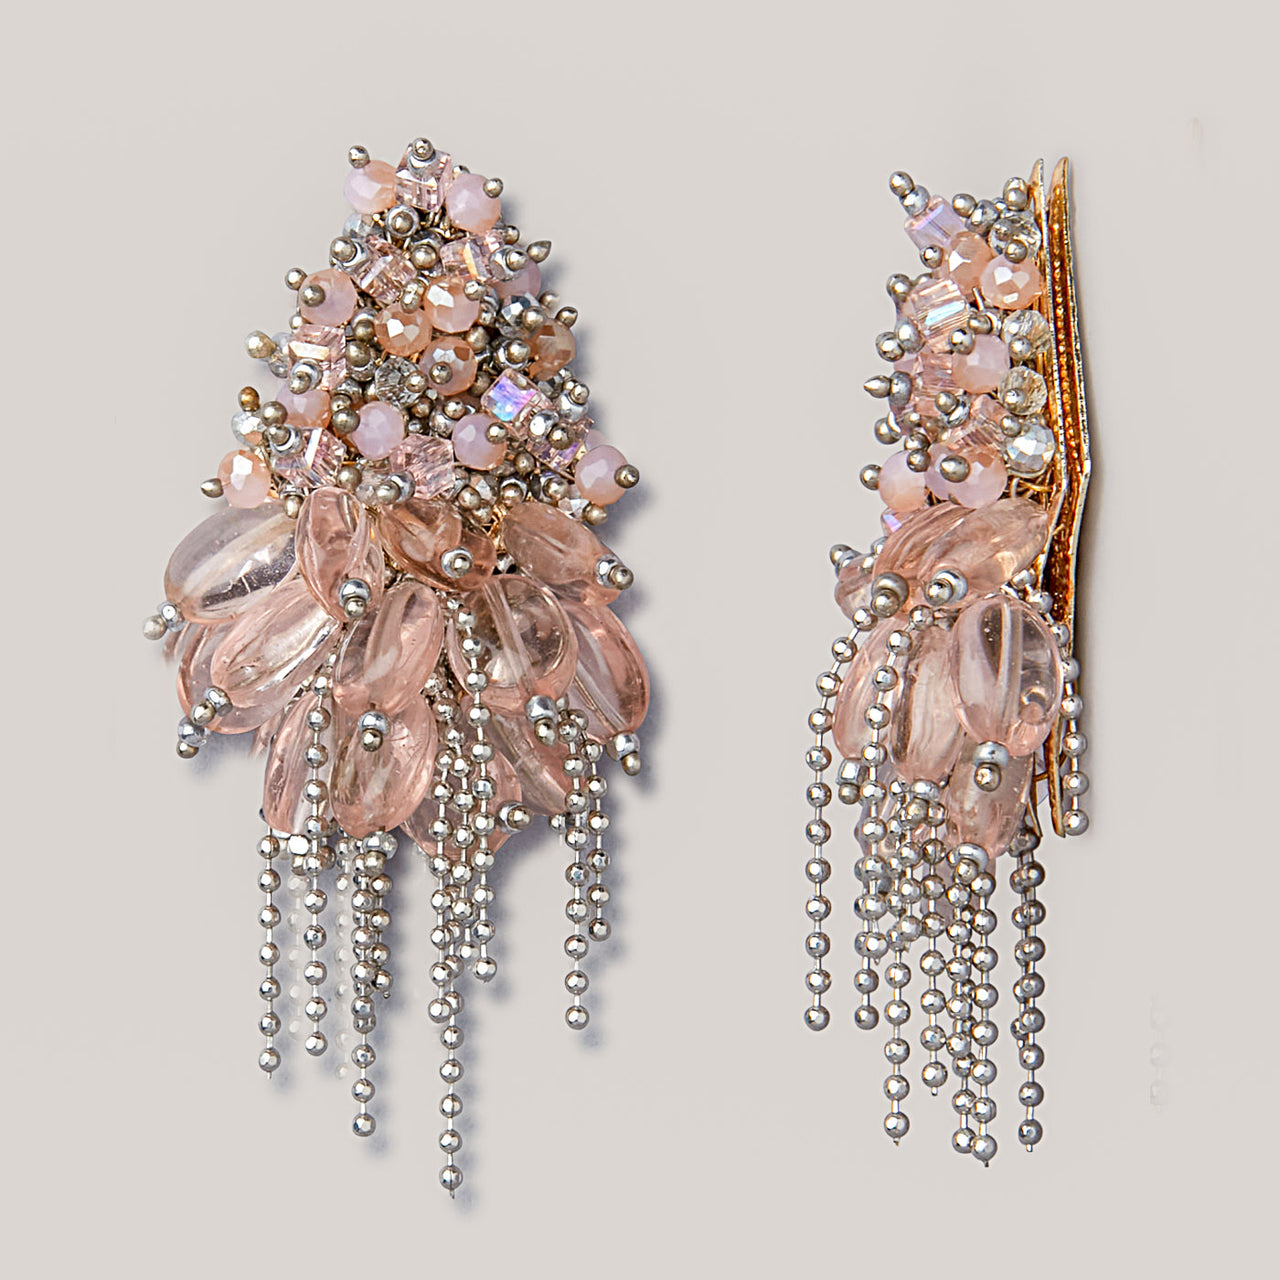 Who Needs Jewellery When You're Wearing Schiaparelli's Evening Gown-Meets- Earring Hybrid? | British Vogue